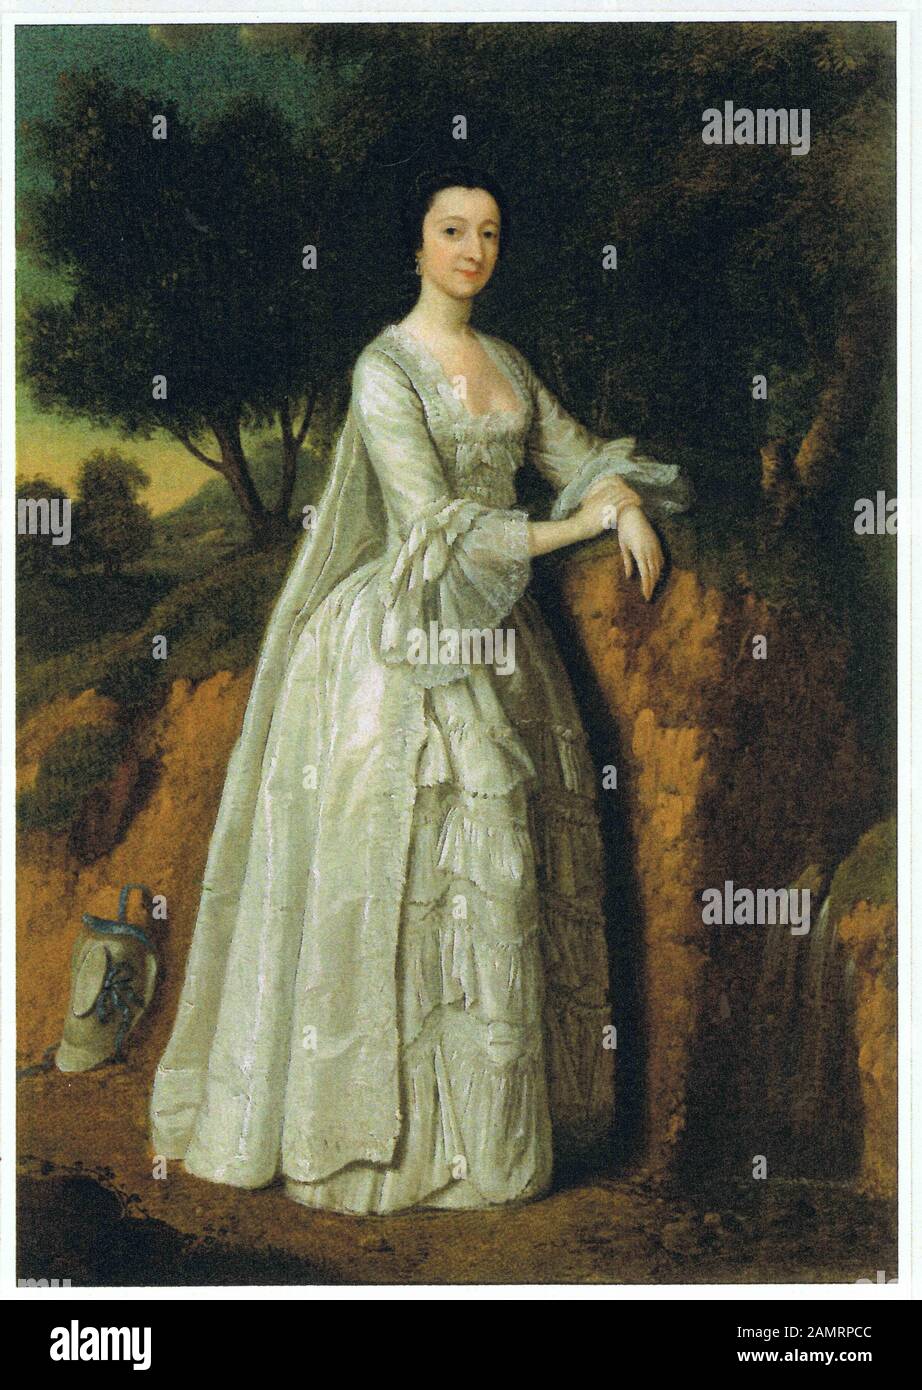 (Presumedly) Elizabeth Montagu (1718 â€“ 1800) in a landscape by Edward Haytley (died 1761).  Other information  Sotheby's New York, Old Master Paintings, May 26, 2005, Lot 13. Painting: oil on canvas, 20 x 16 inches. Provenance: -With Arthur Ackermann & Son, London. -Private collection.; circa 1744 date QS:P,+1744-00-00T00:00:00Z/9,P1480,Q5727902 (and certainly before 1761); Original publication: GB (now UK) Imte source: Sammlung Fane de Salis & Sotheby's.; Edward Haytley (Life time: died 1761); Stock Photo